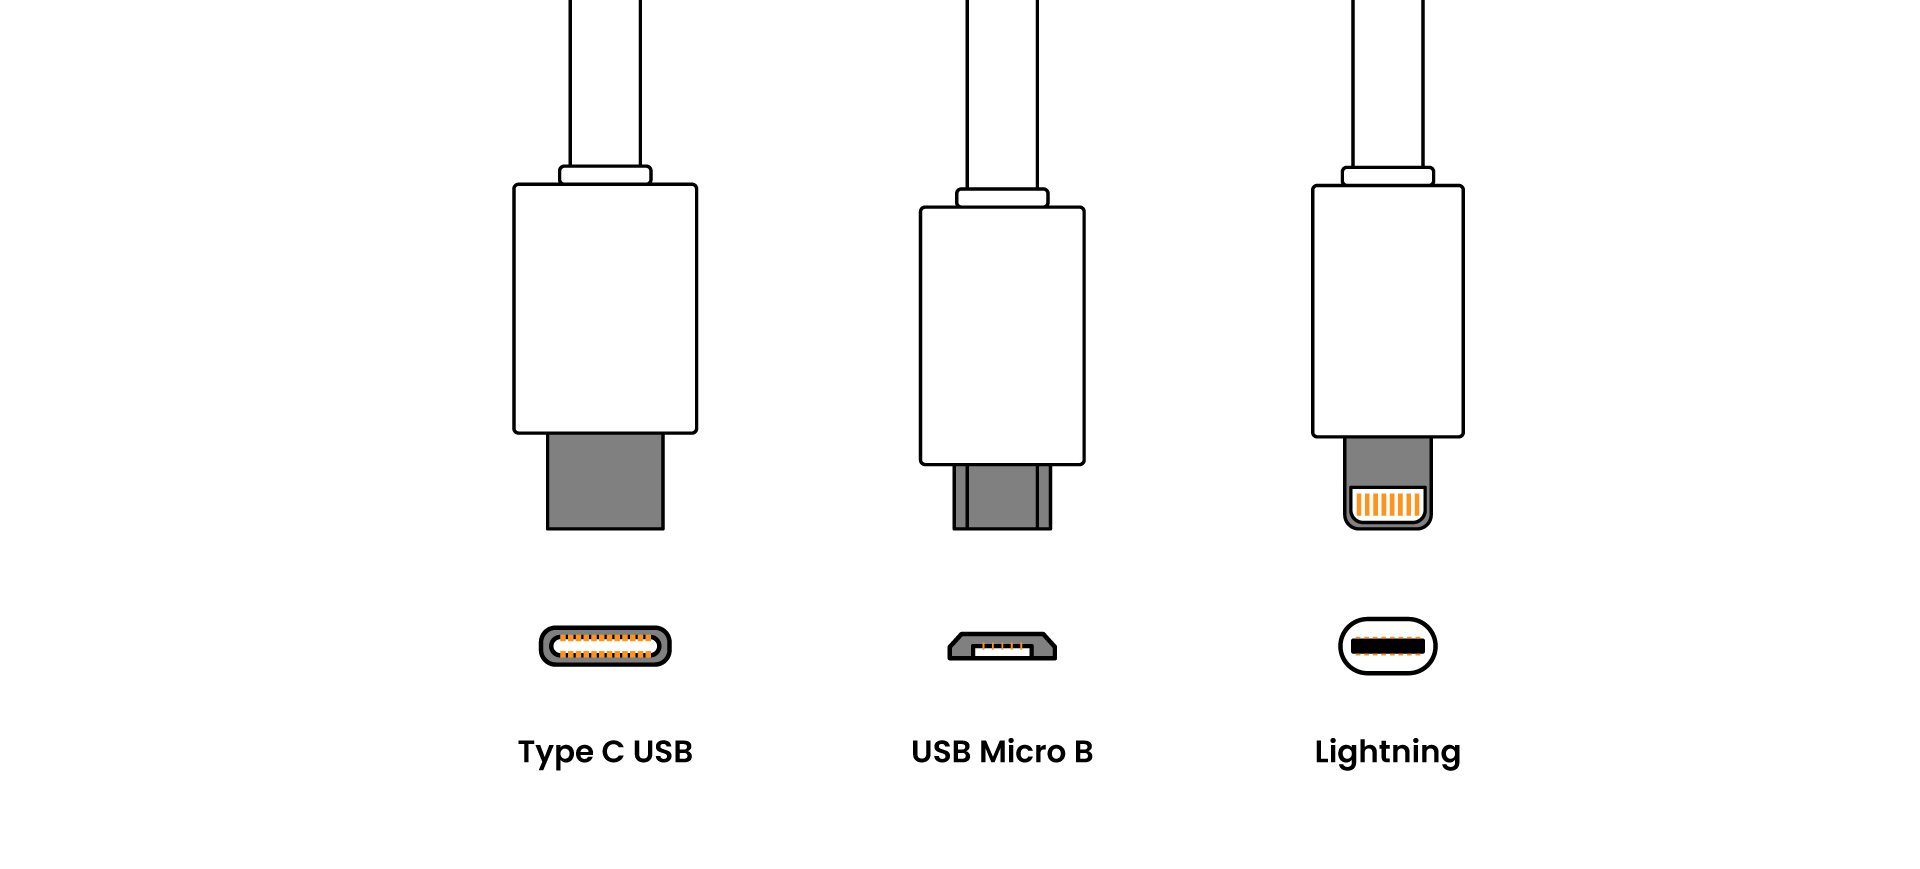 Simple distinctions in the physical appearance of USB-C, Micro USB, and Lightning